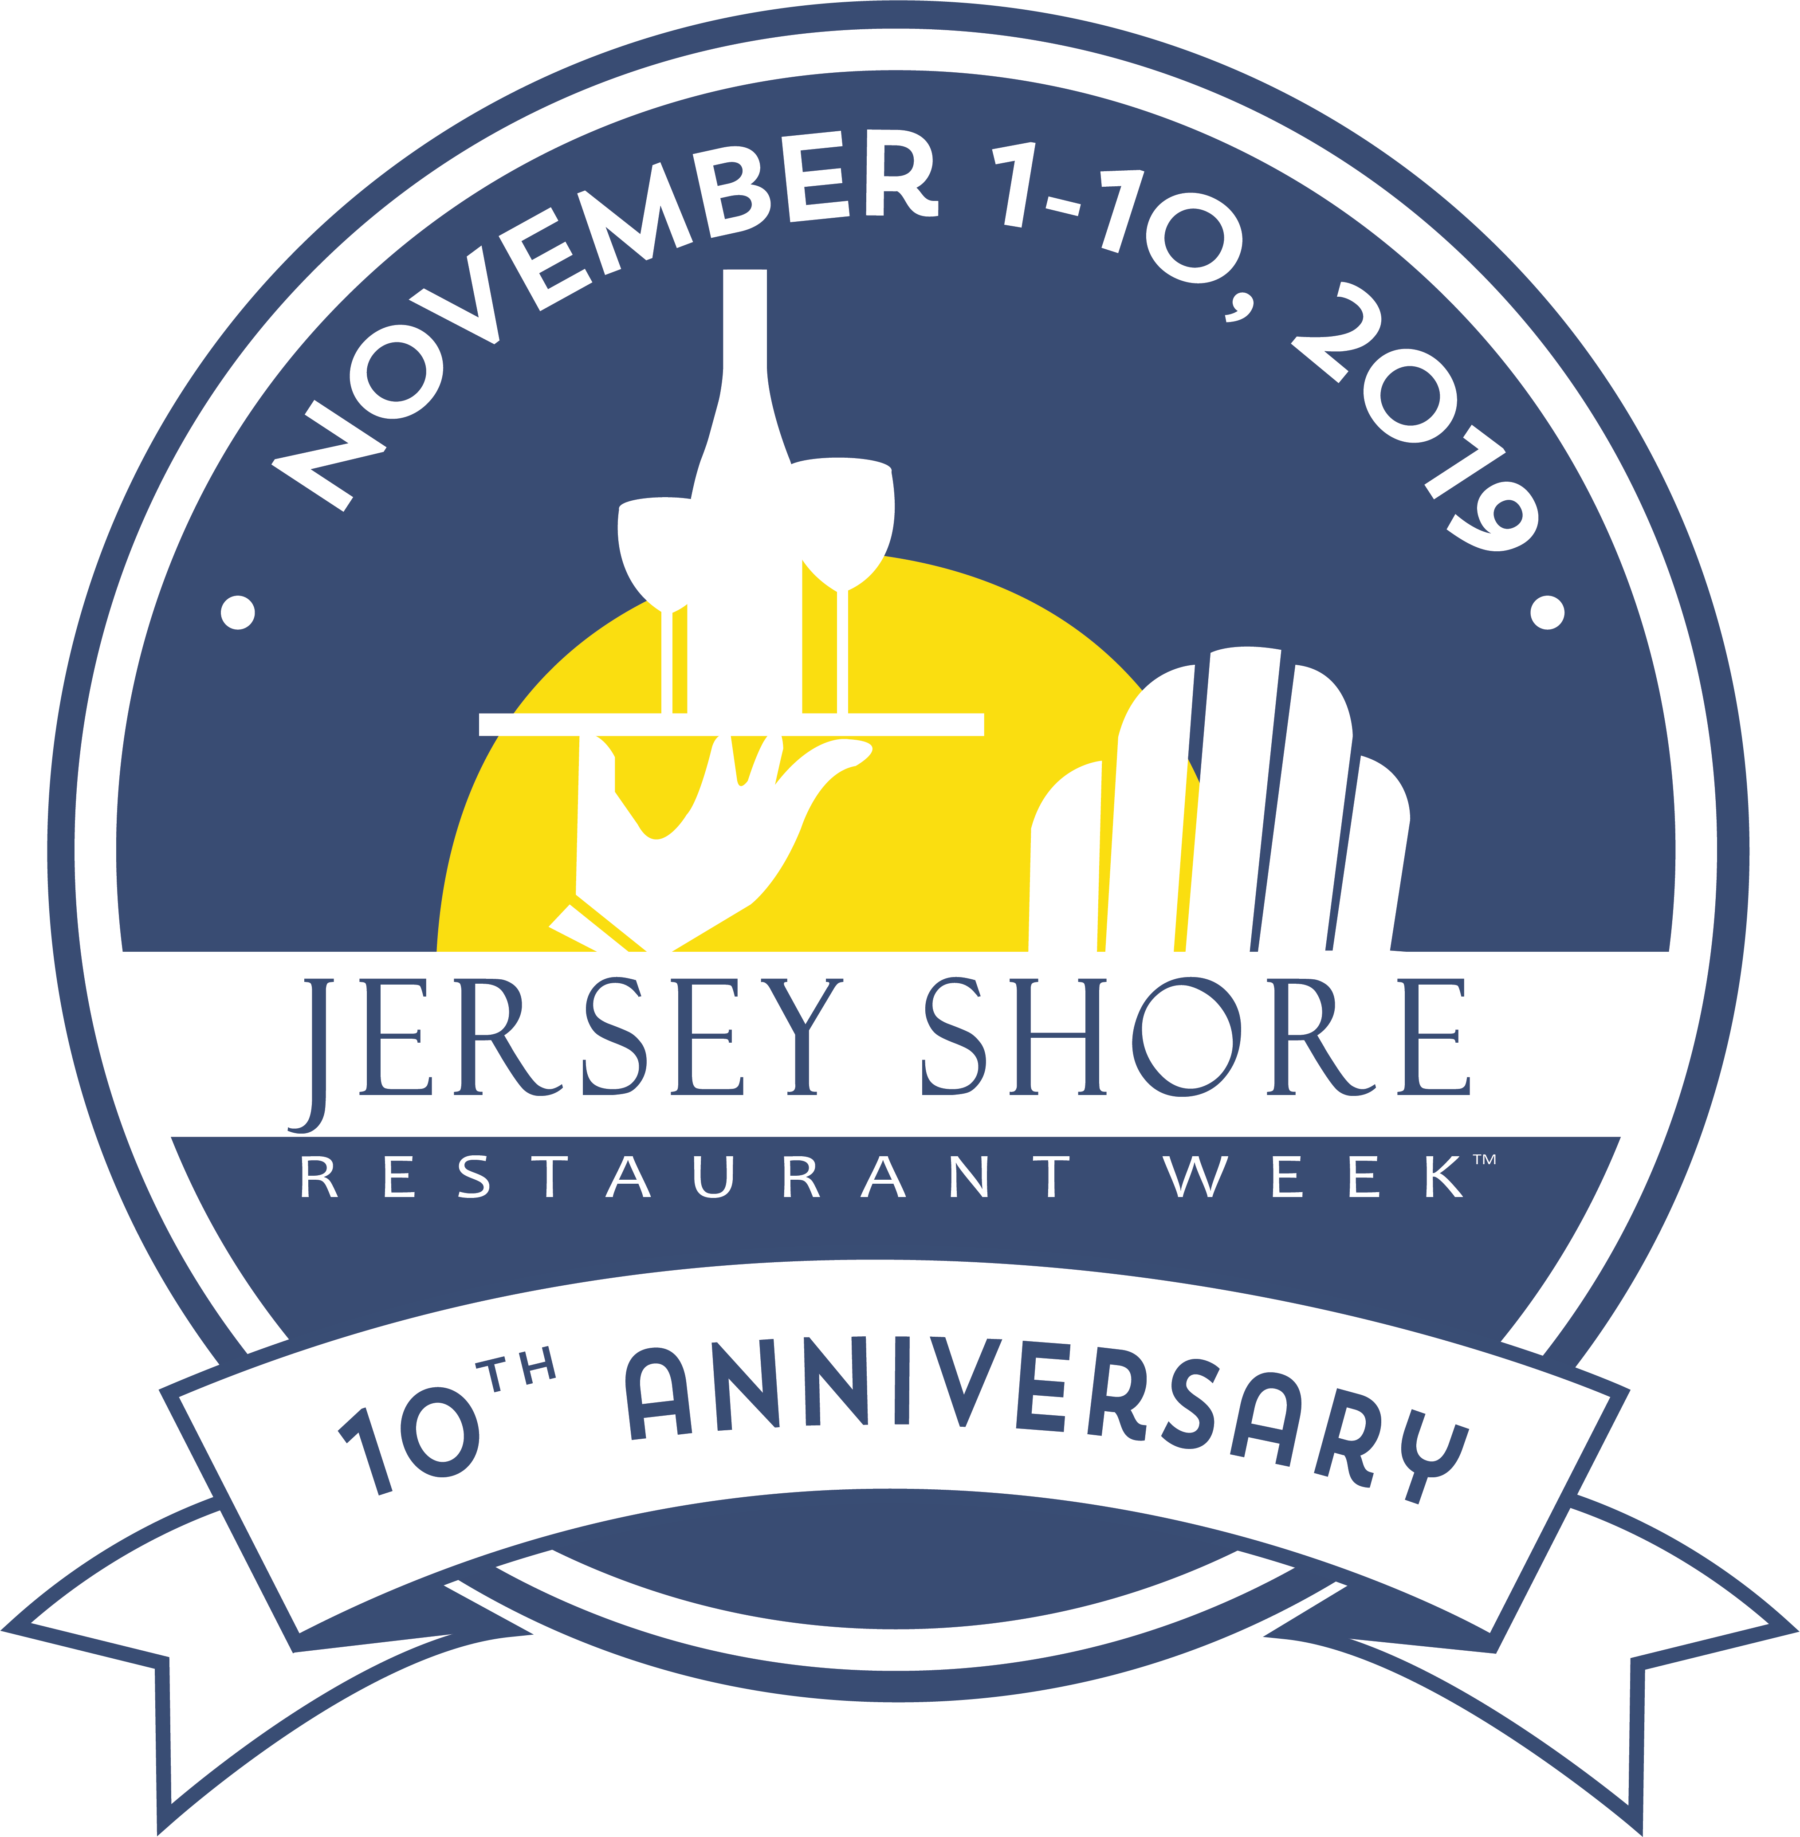 10th Anniversary LOGO with Date at the top